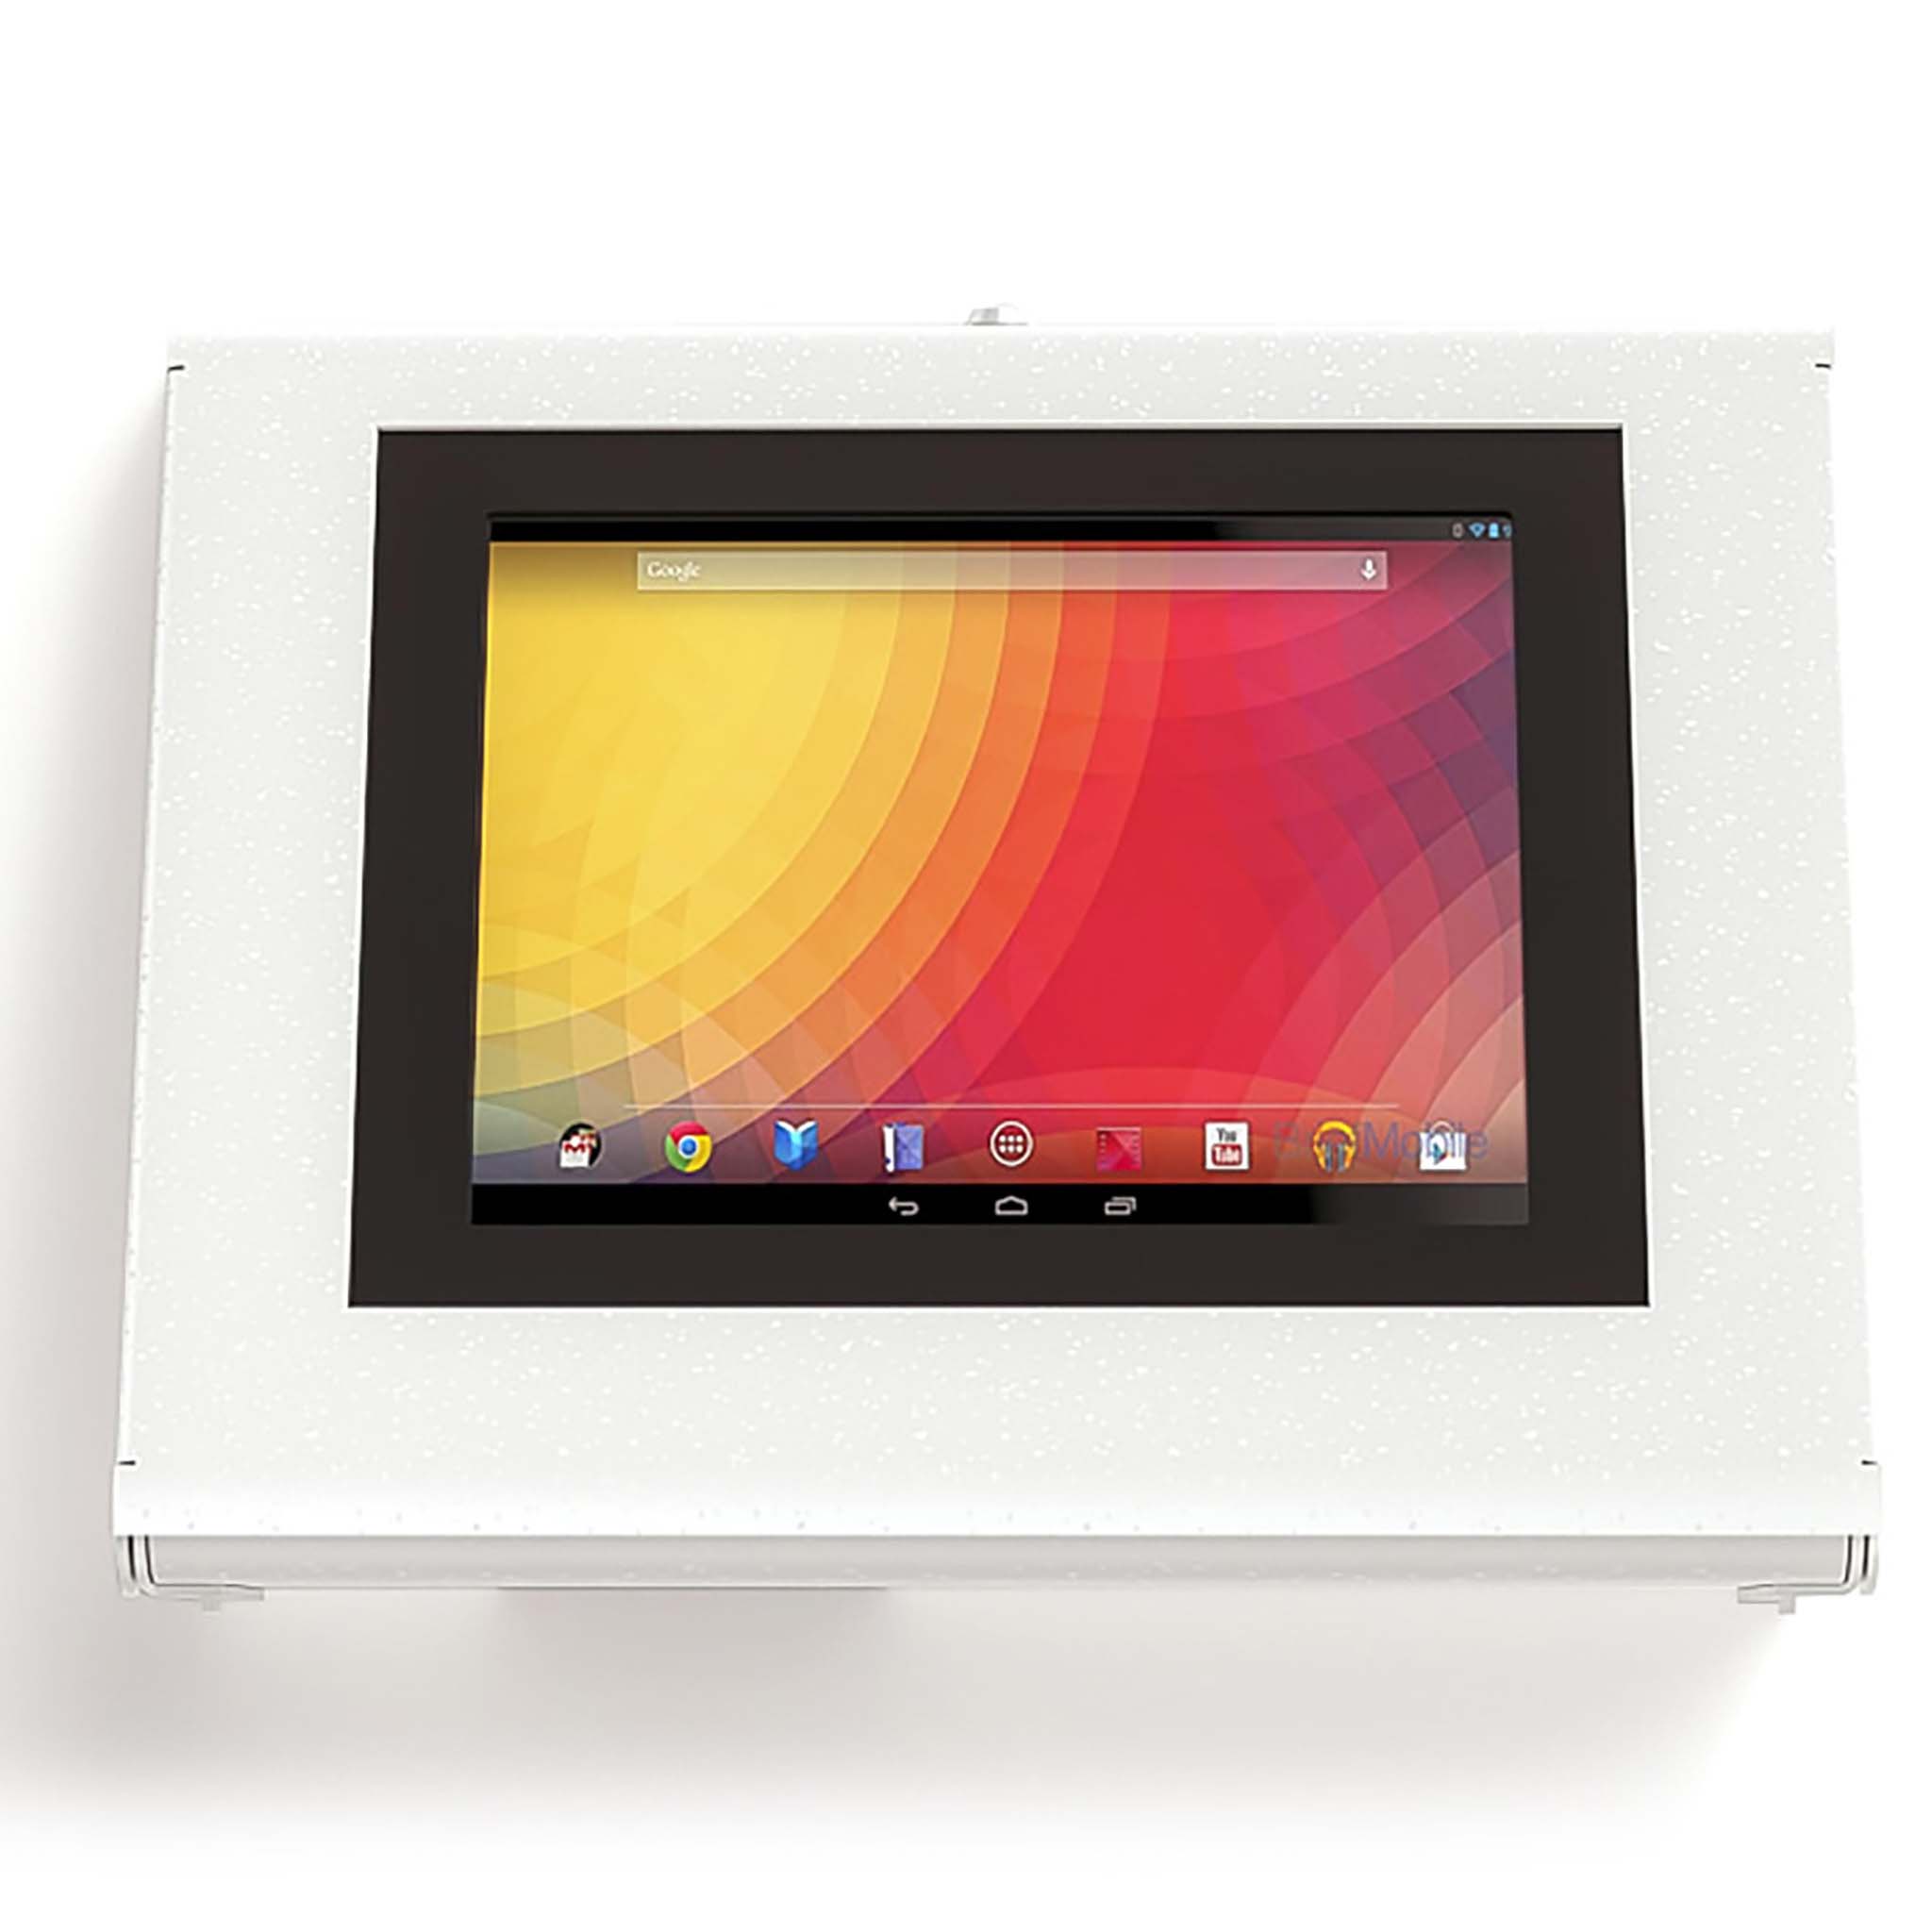 White Keyo surface and wall mounted tablet enclosure with tablet screen interface.